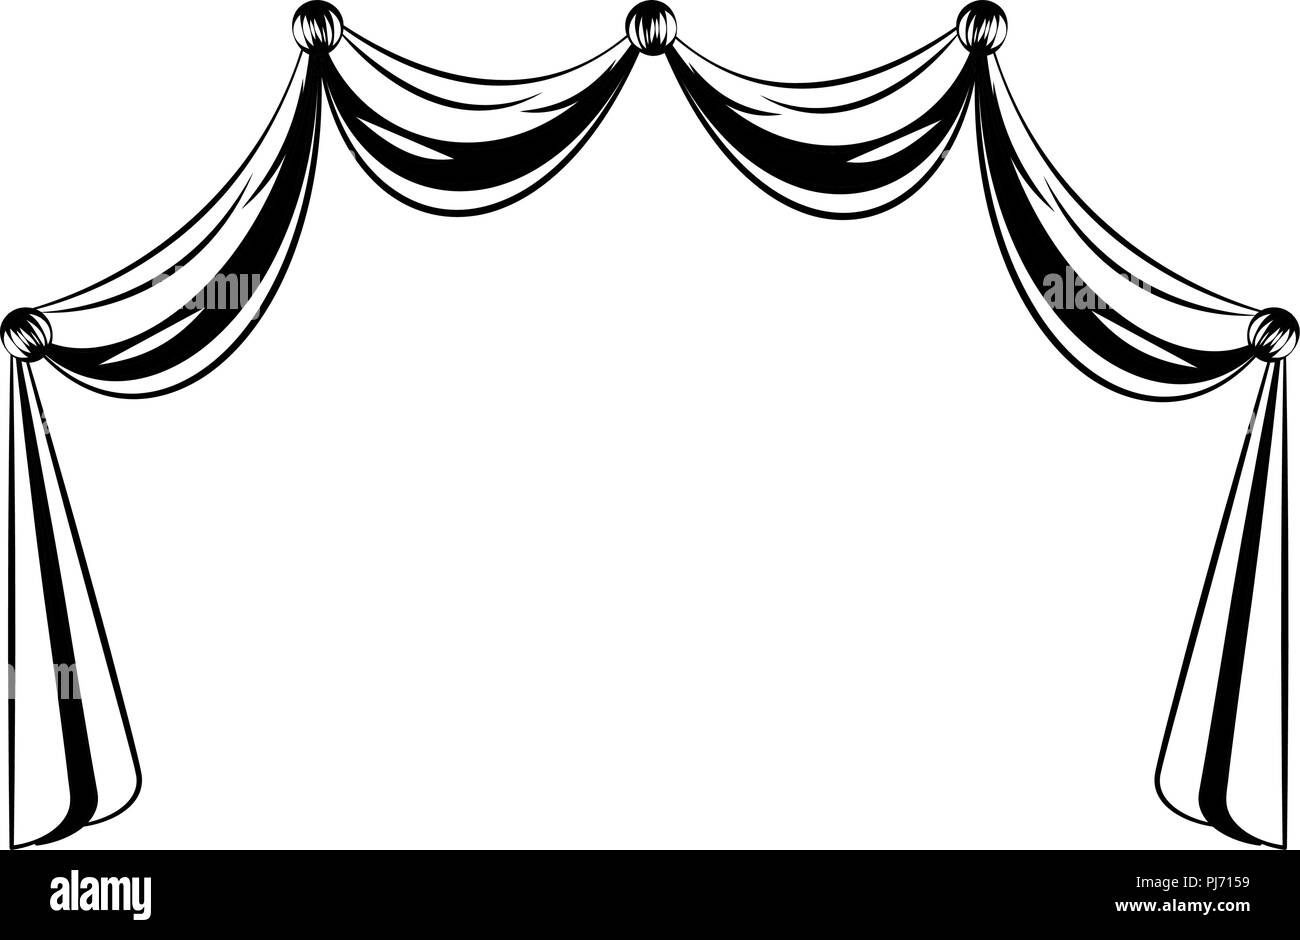 Black Stage Curtains Stock Photos & Black Stage Curtains Stock Images ...